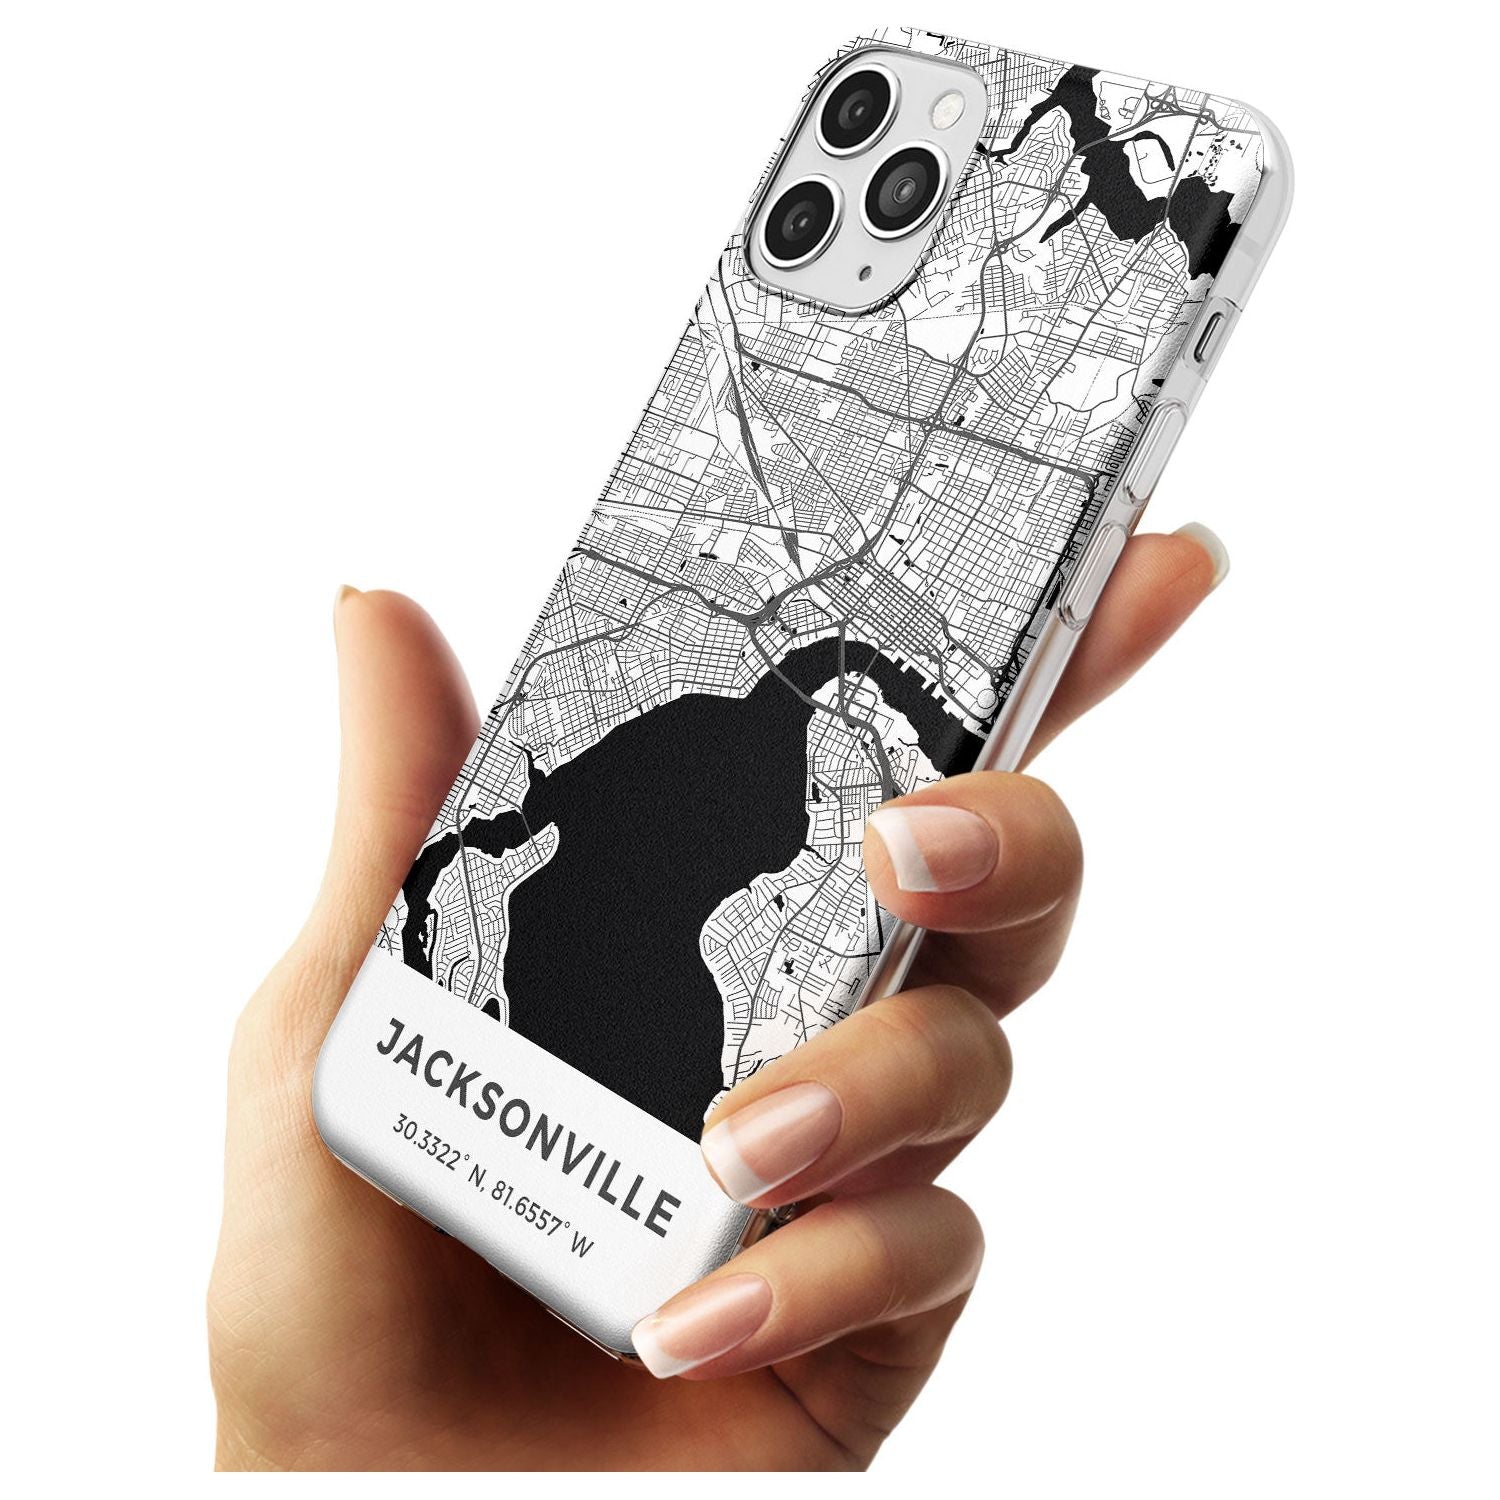 Map of Jacksonville, Florida Slim TPU Phone Case for iPhone 11 Pro Max